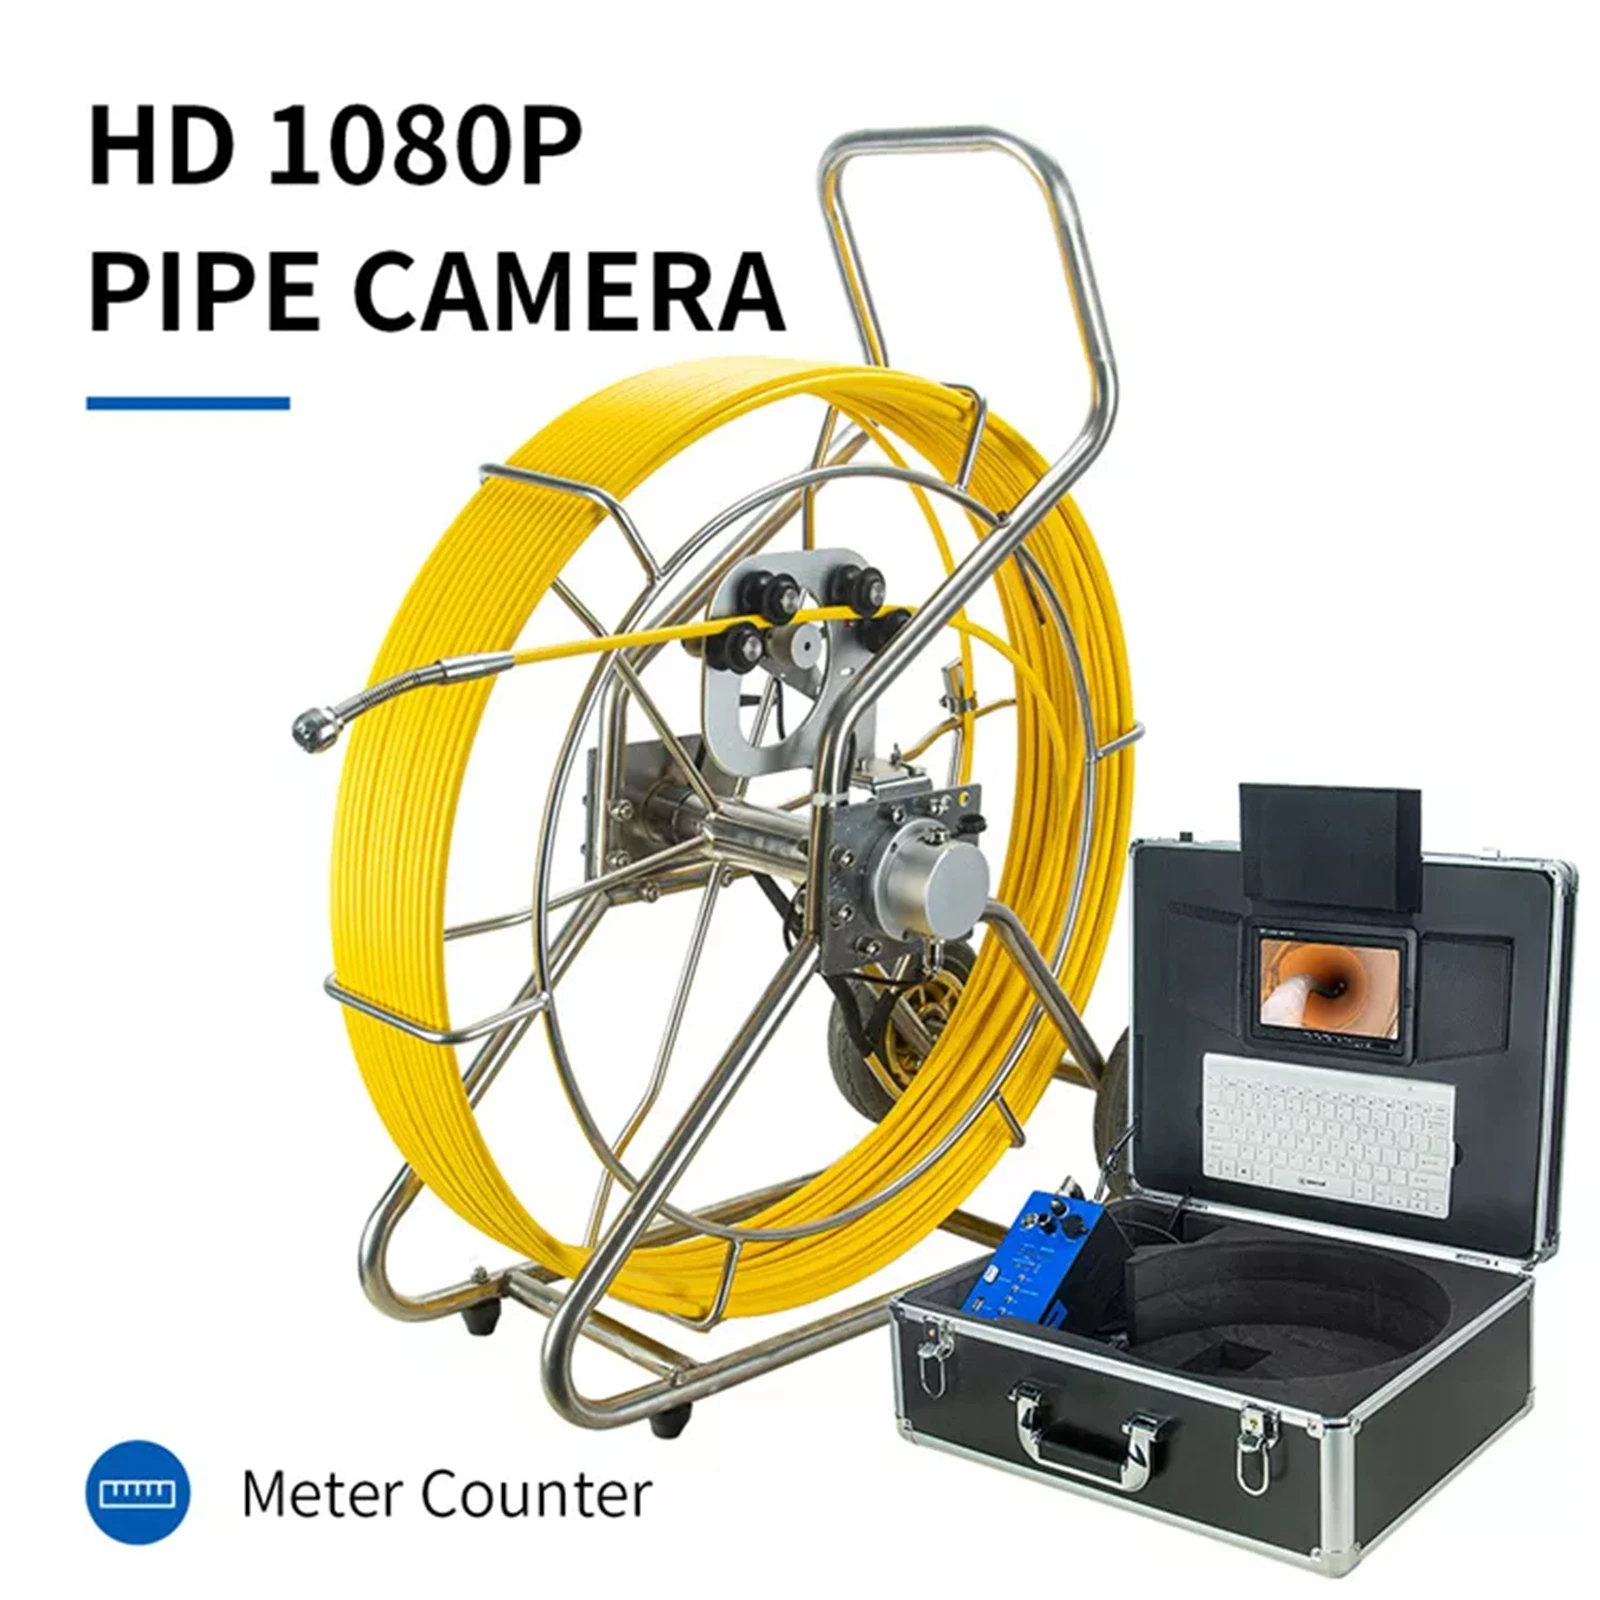 Pipe Inspection Camera, SYANSPAN 9 inch Sewer Endoscope Camer Meter Counter Vedio and Redio and 32X image enlarge and 9mm cable pipe inspection camera syanspan 9 inch sewer endoscope camer meter counter vedio and redio and 32x image enlarge and 9mm cable